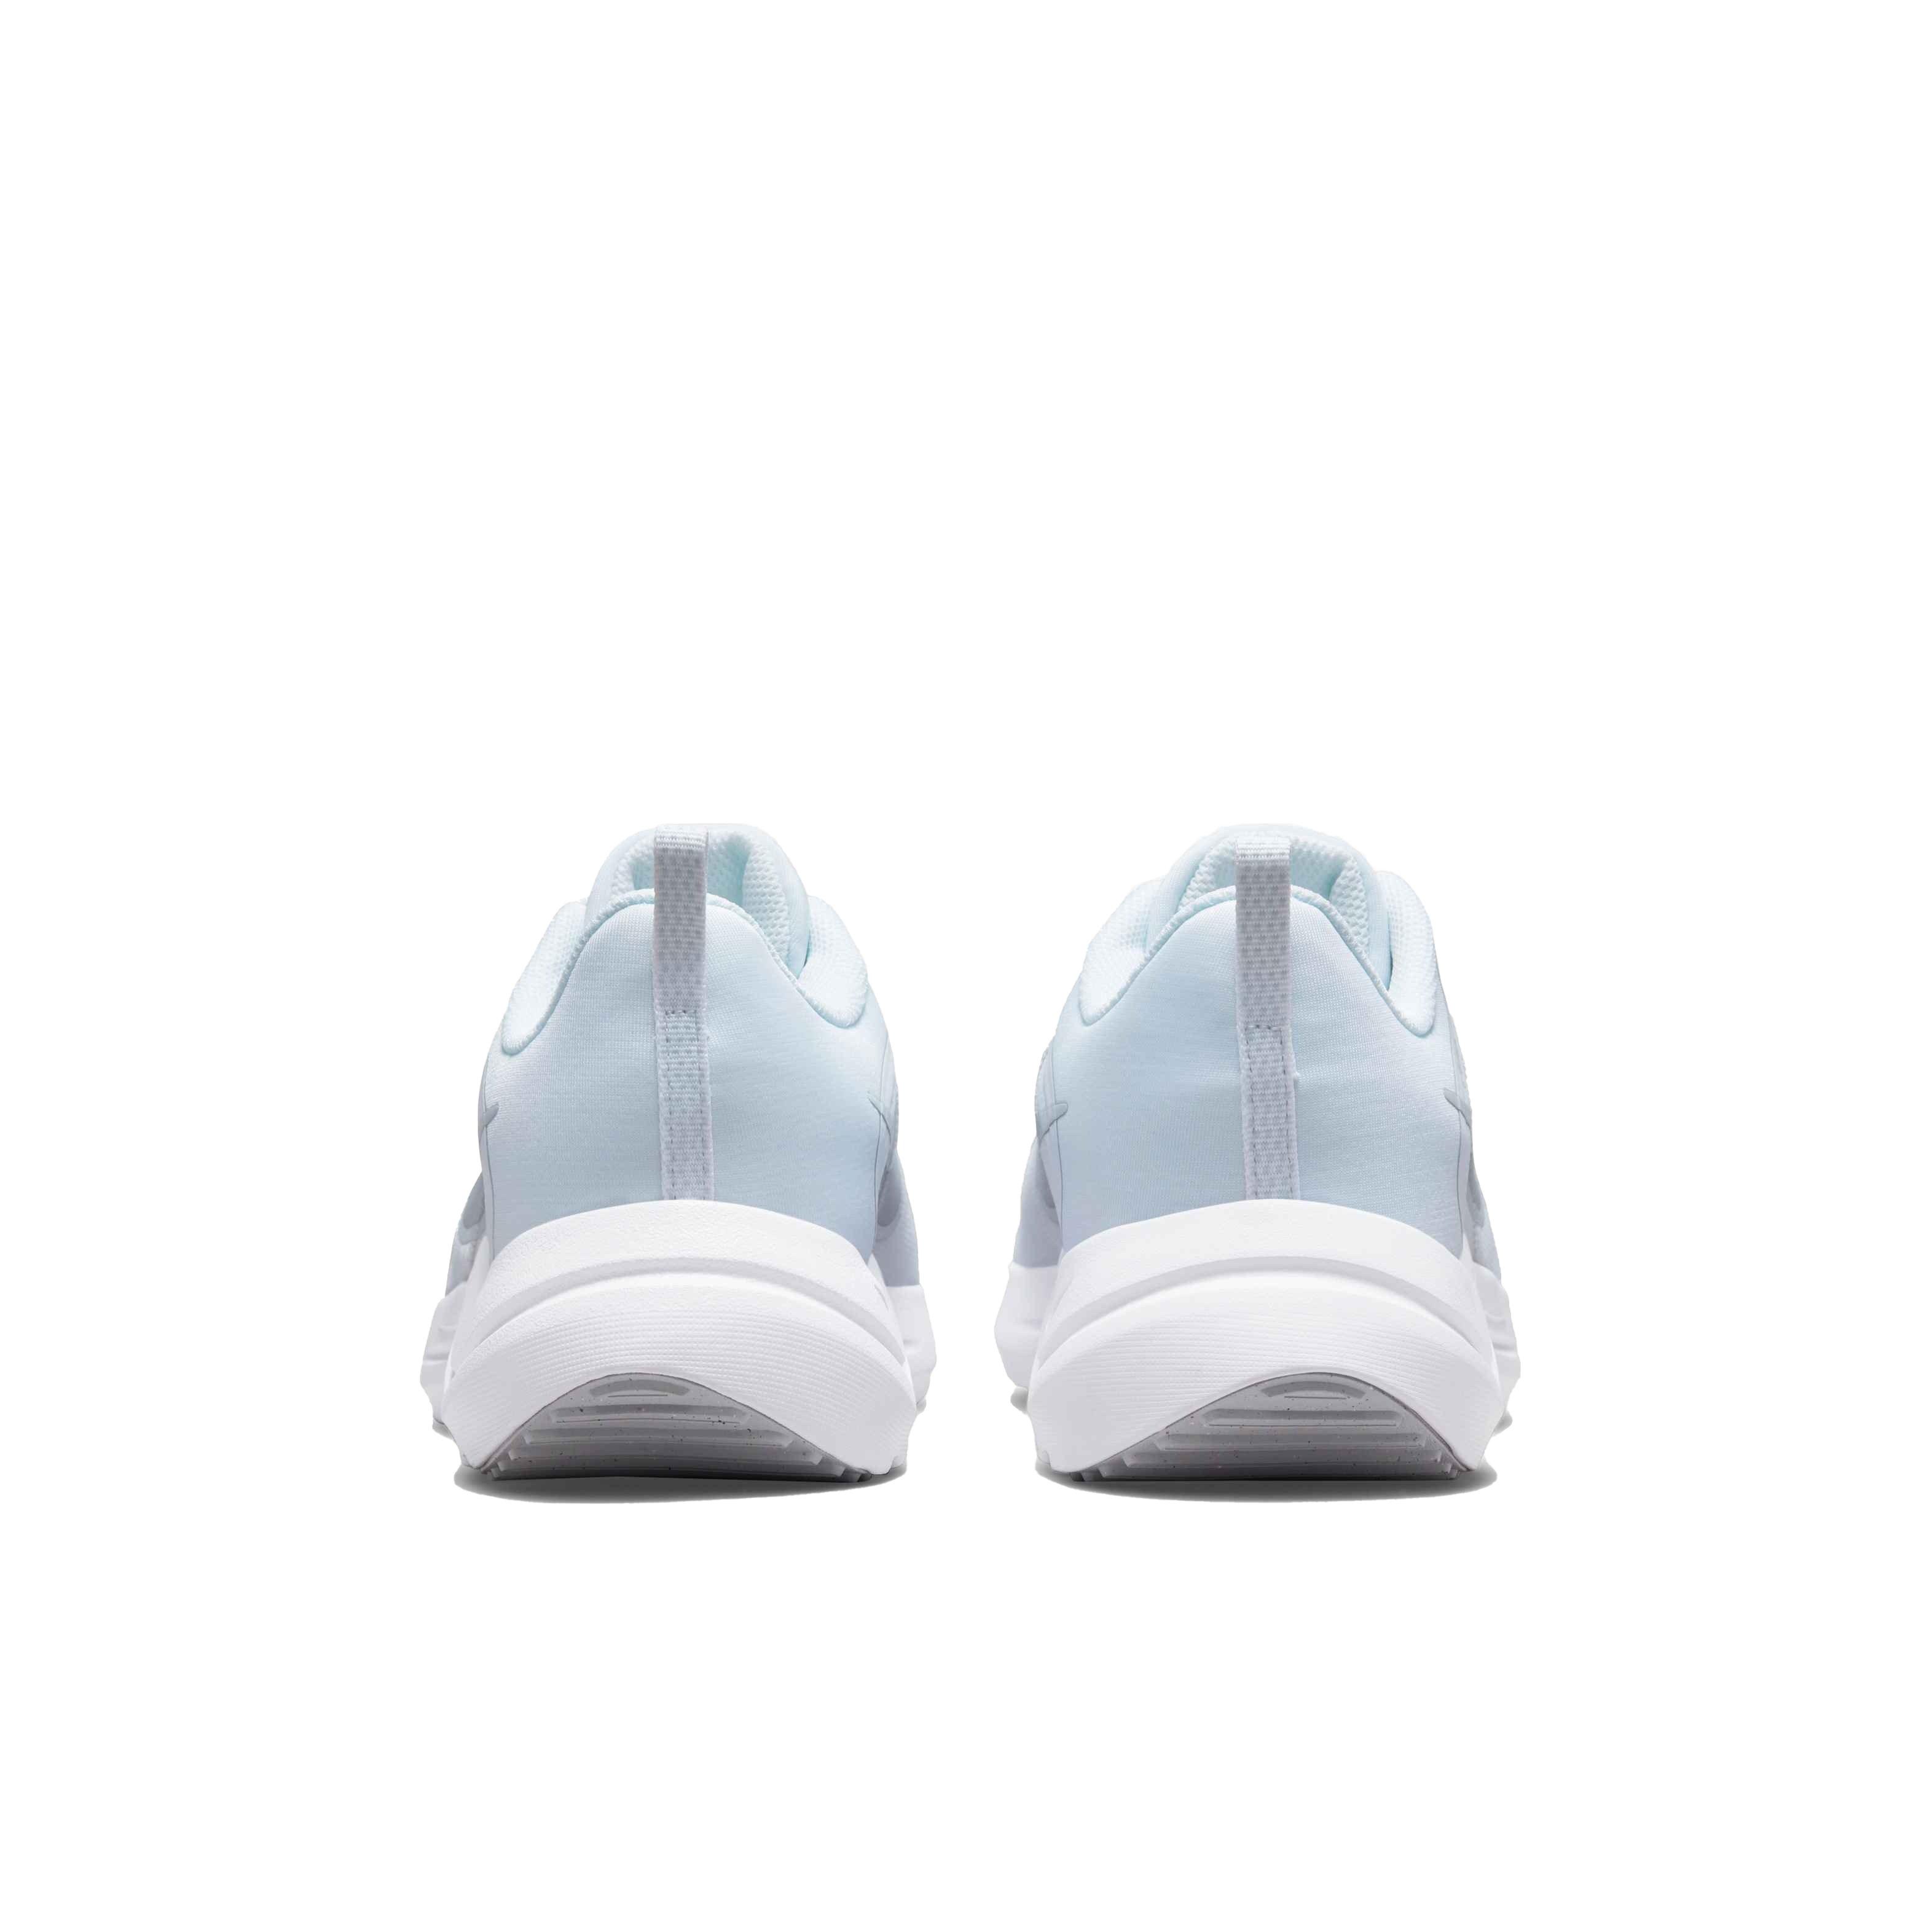 RvceShops - 1A9V9V - nike downshifter 7 mens white sneakers Low x LOUIS  VUITTON LV 'Green White